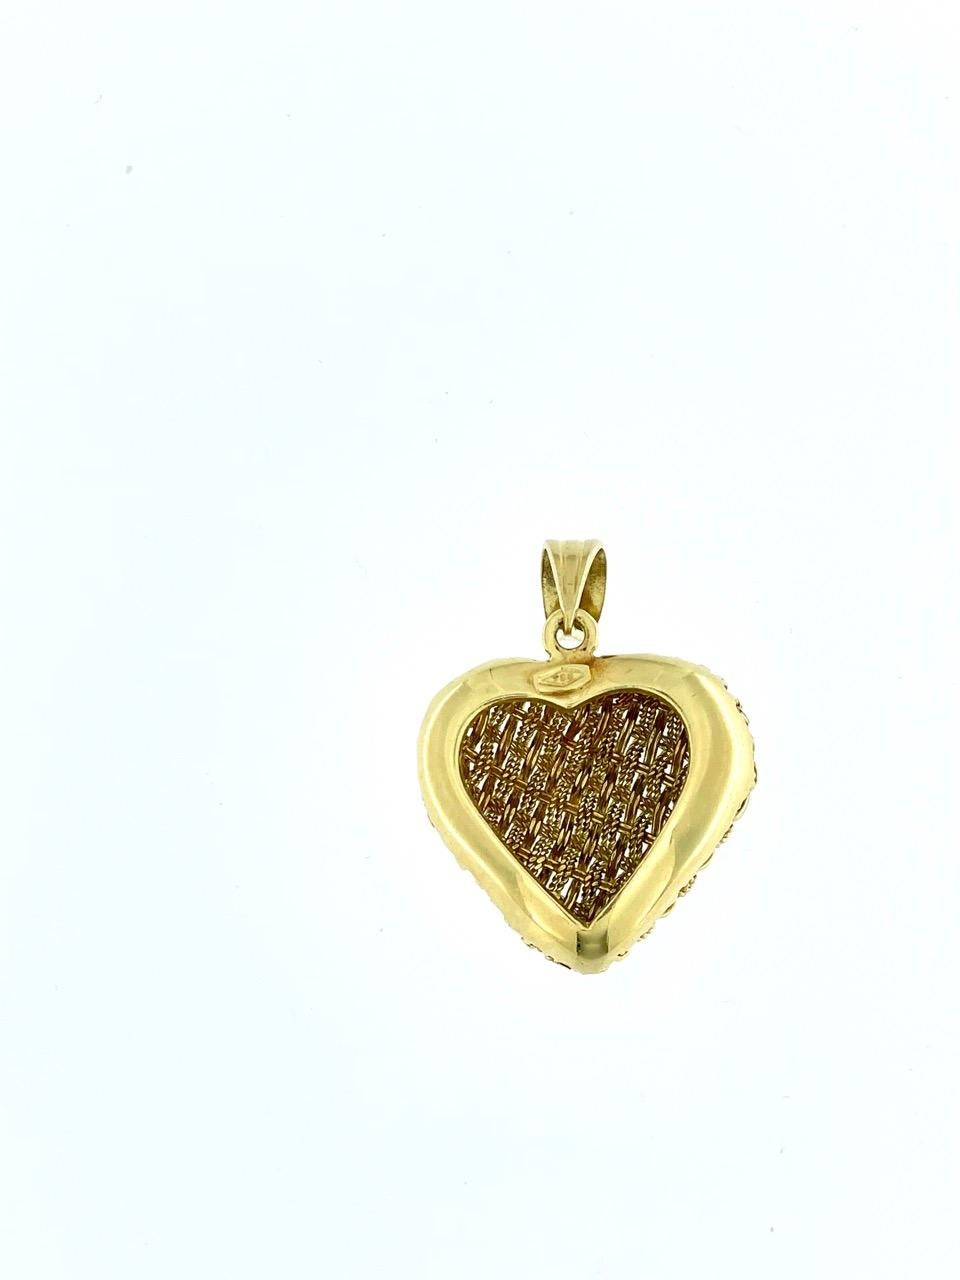 Modern French Heart Pendant Yellow Gold Filigree For Sale